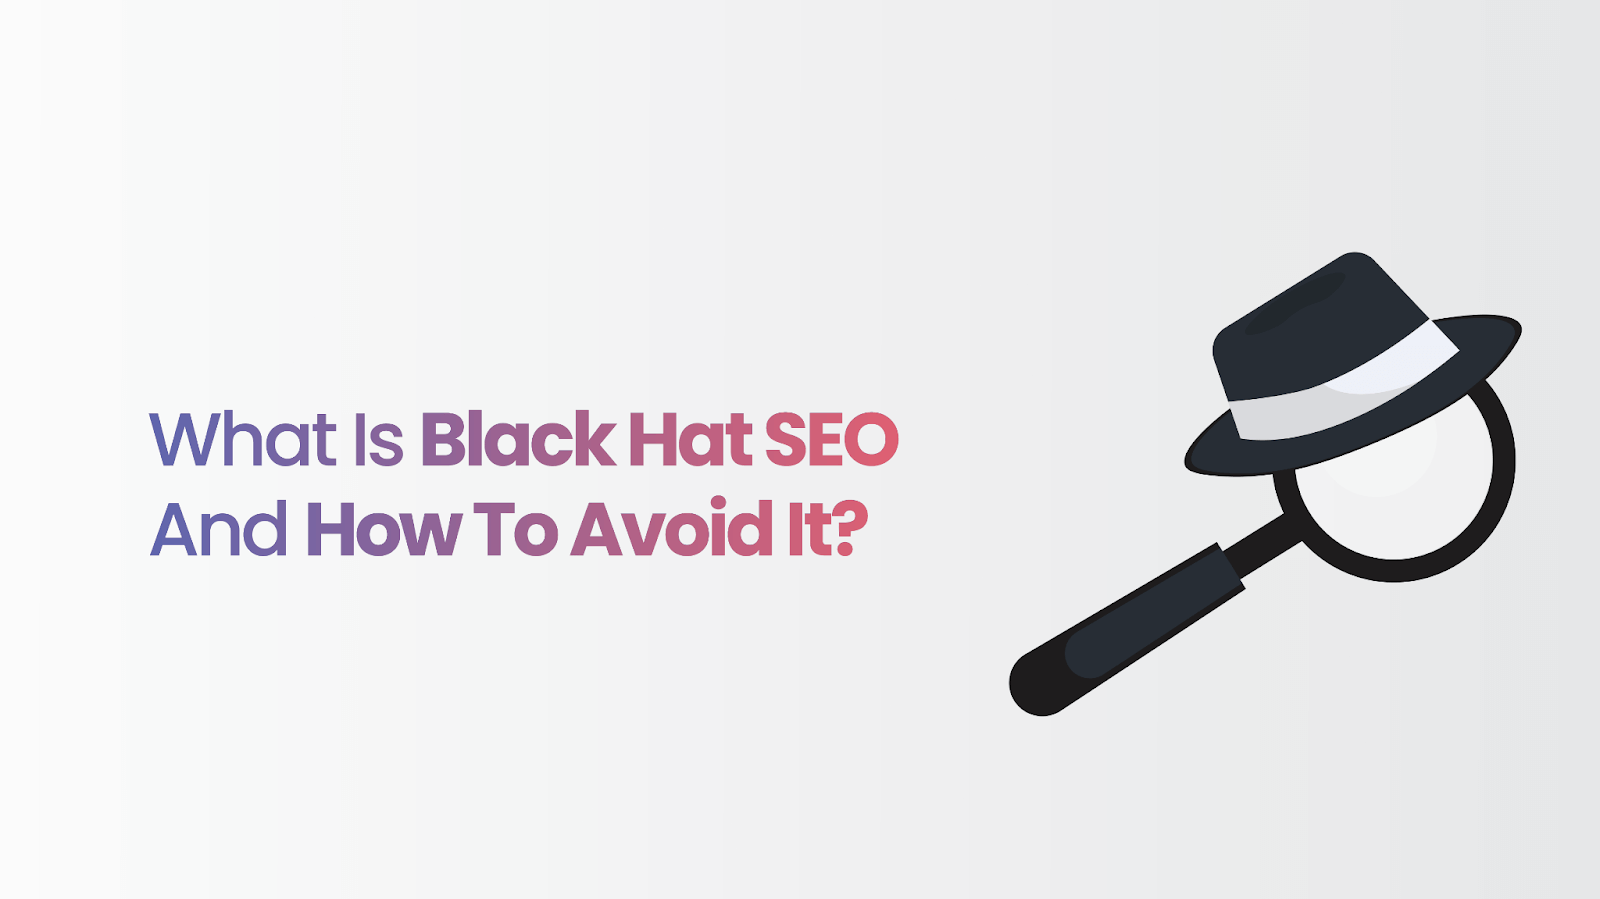 What Is Black Hat SEO And How To Avoid It